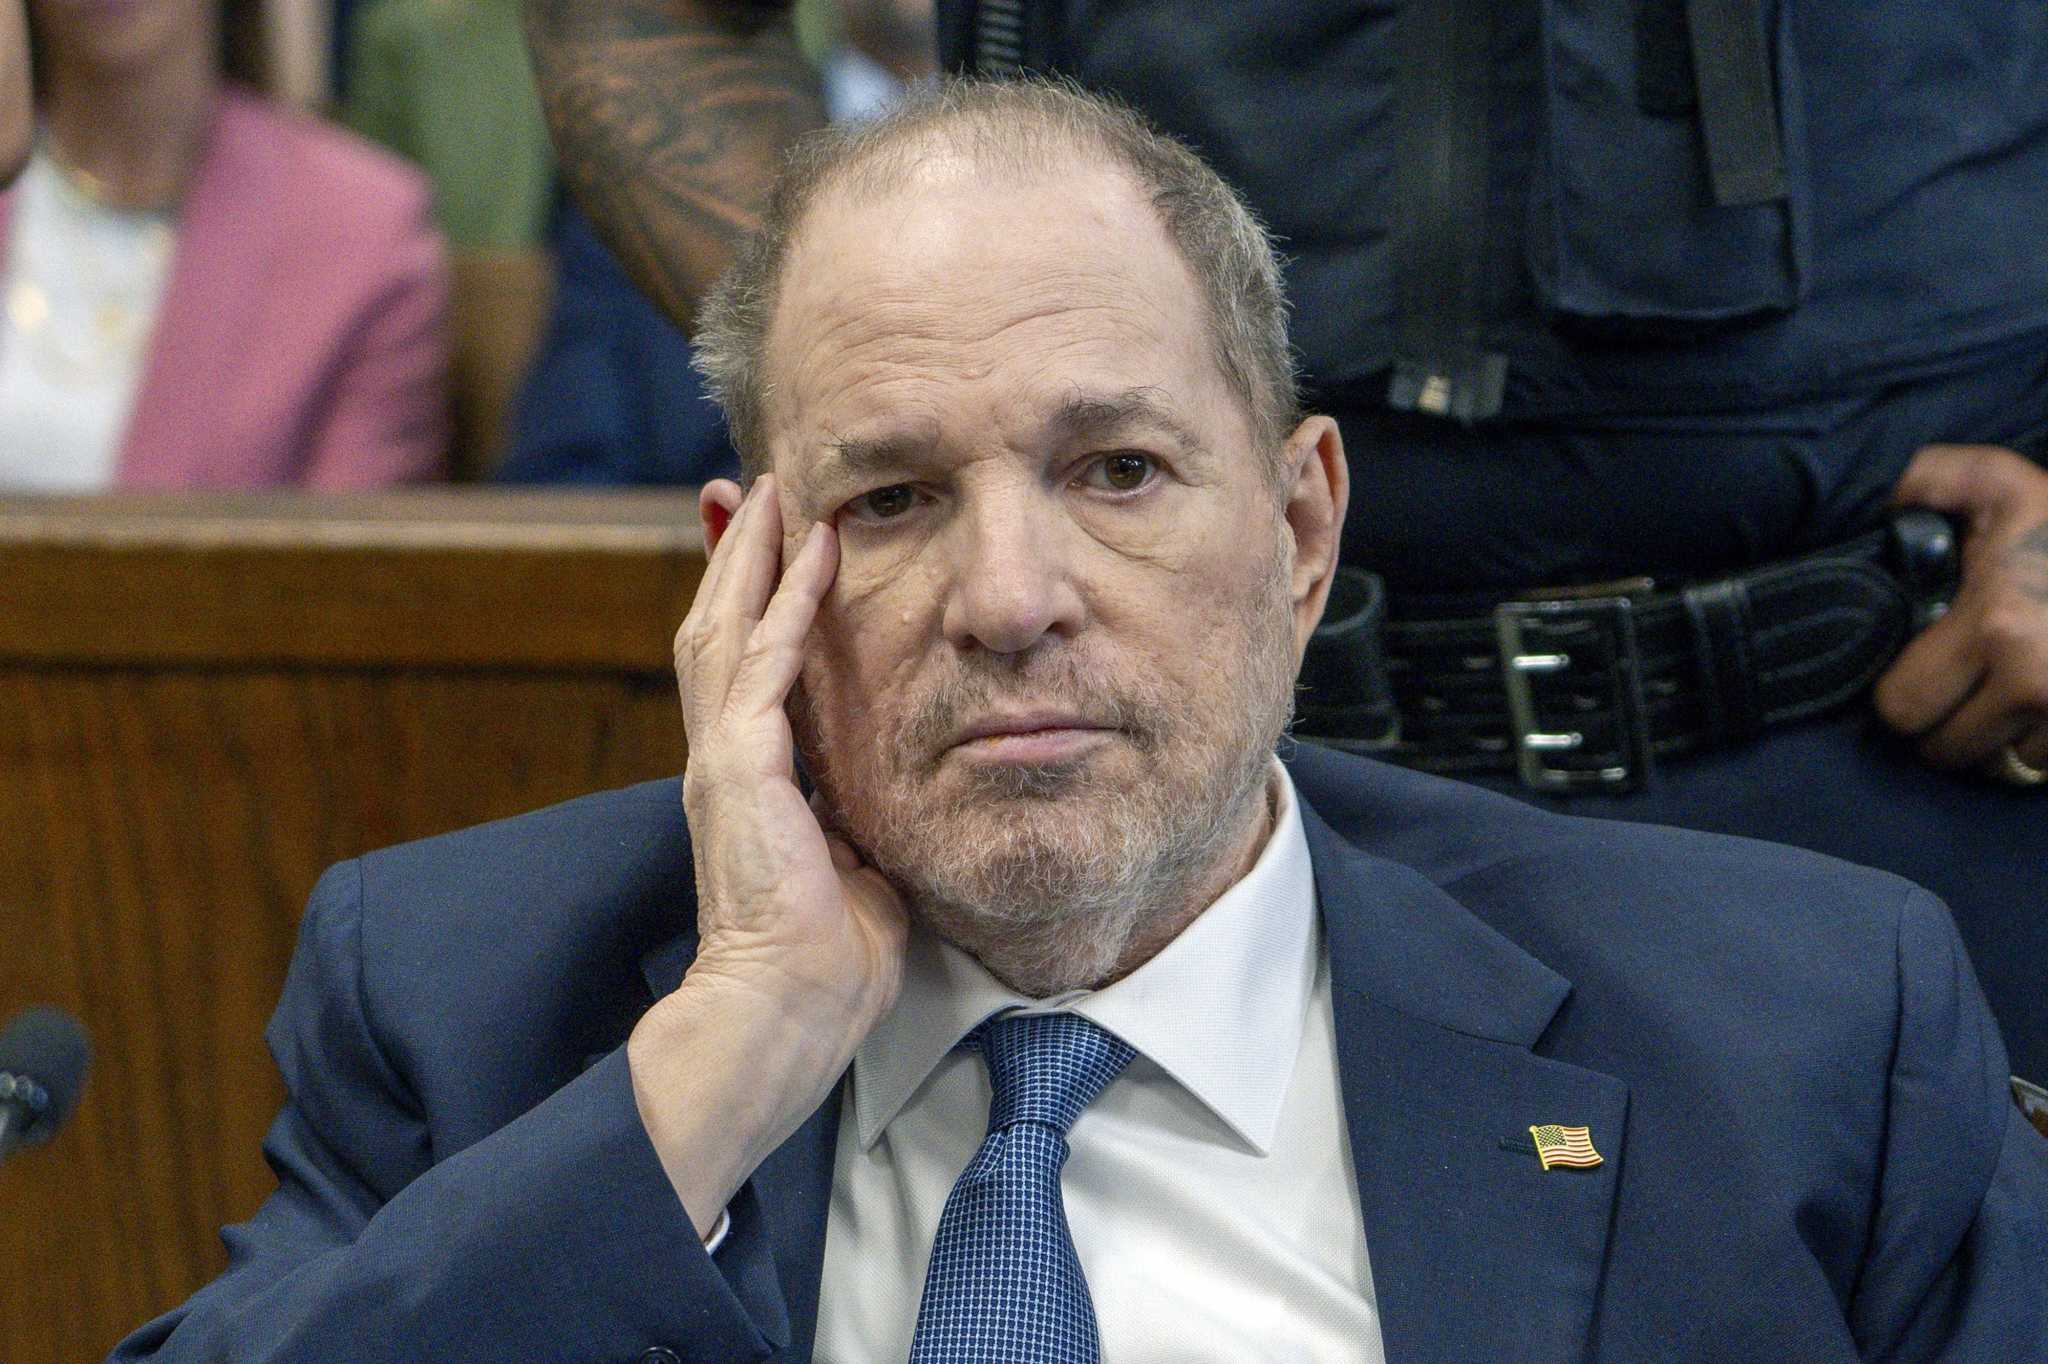 After Weinstein's case was overturned, New York lawmakers move to strengthen sex crime prosecutions